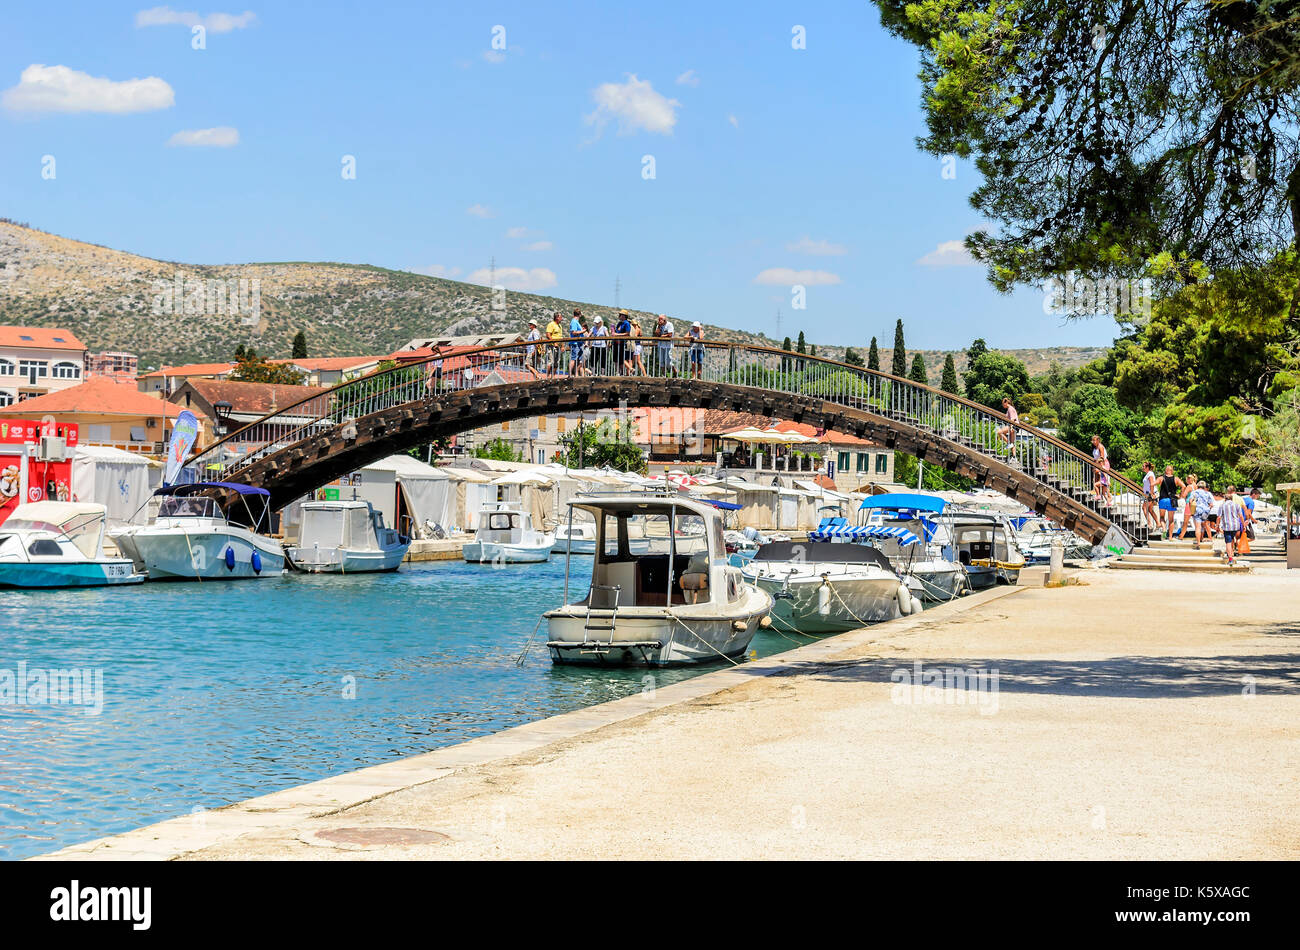 Bridge over the canal in the city of Trogir, Croatia. Stock Photo